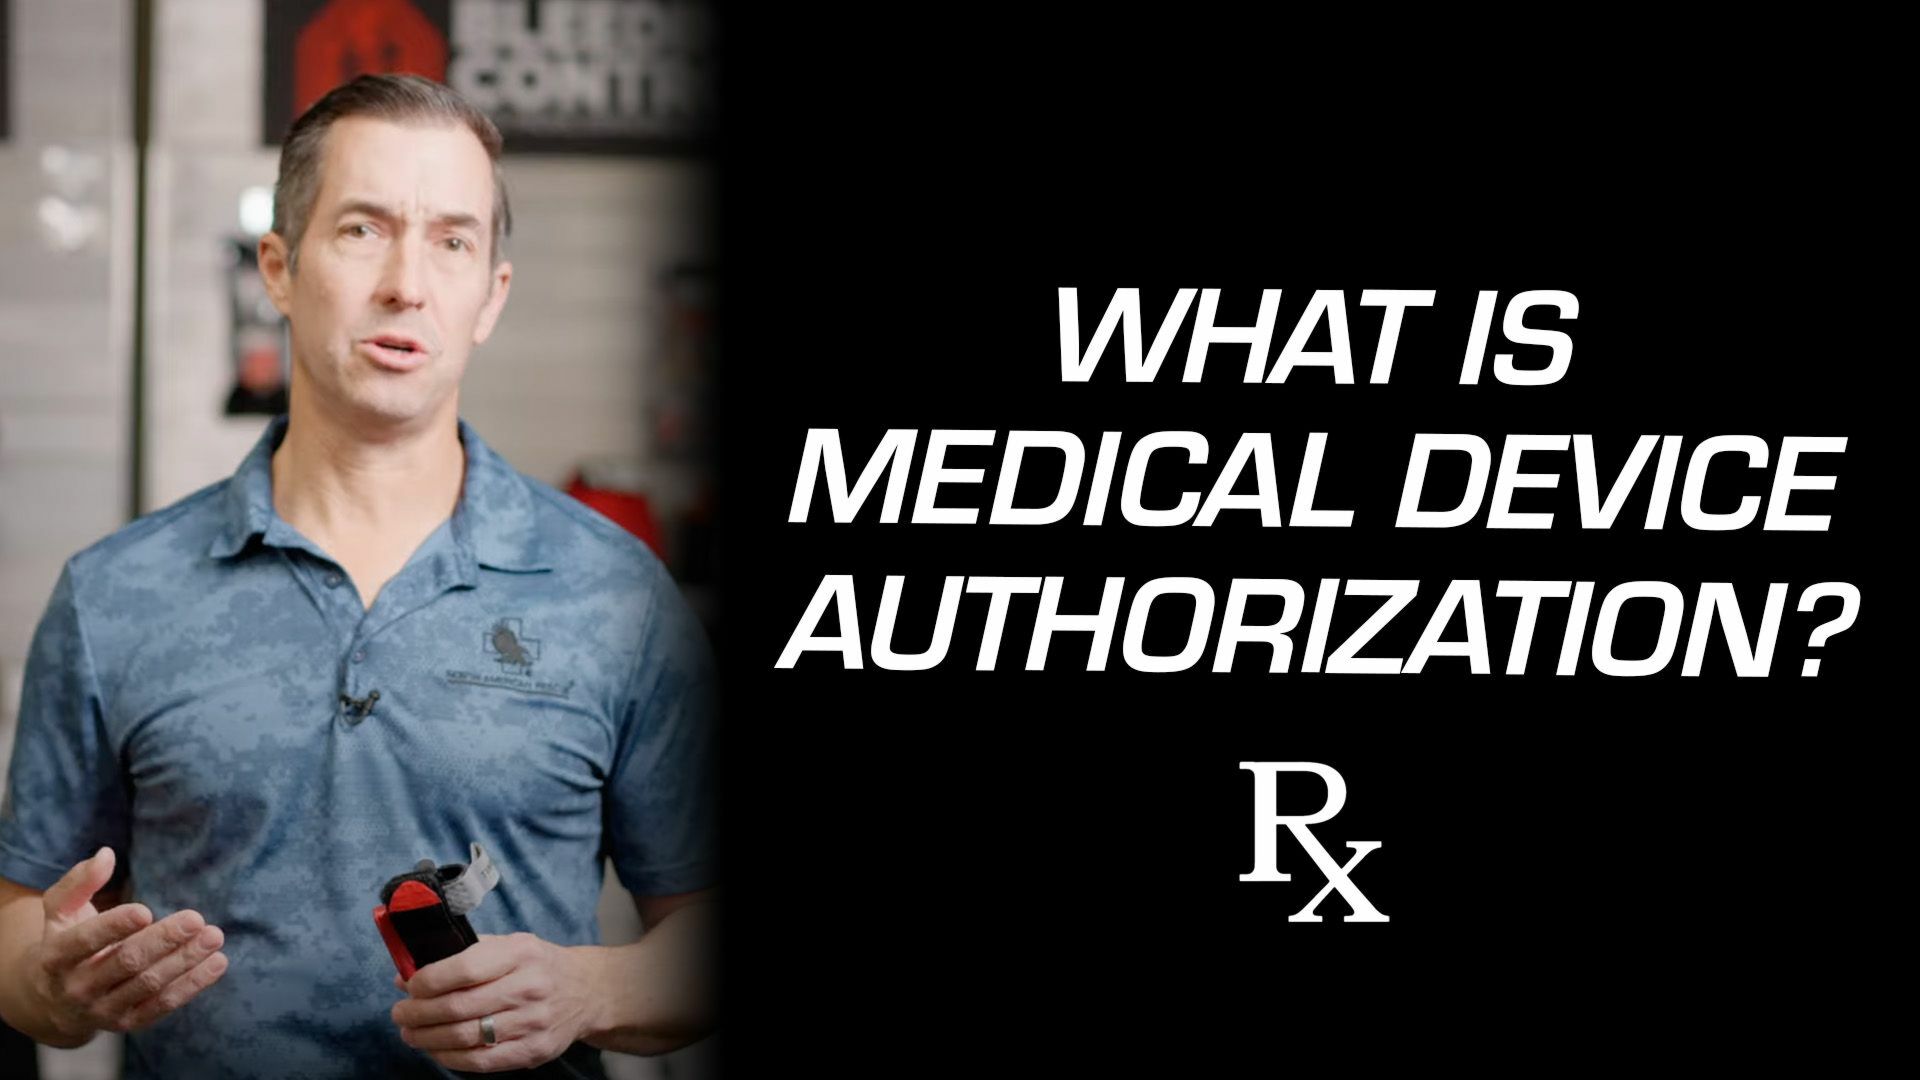 Why do some products require Medical Device Authorization to purchase?